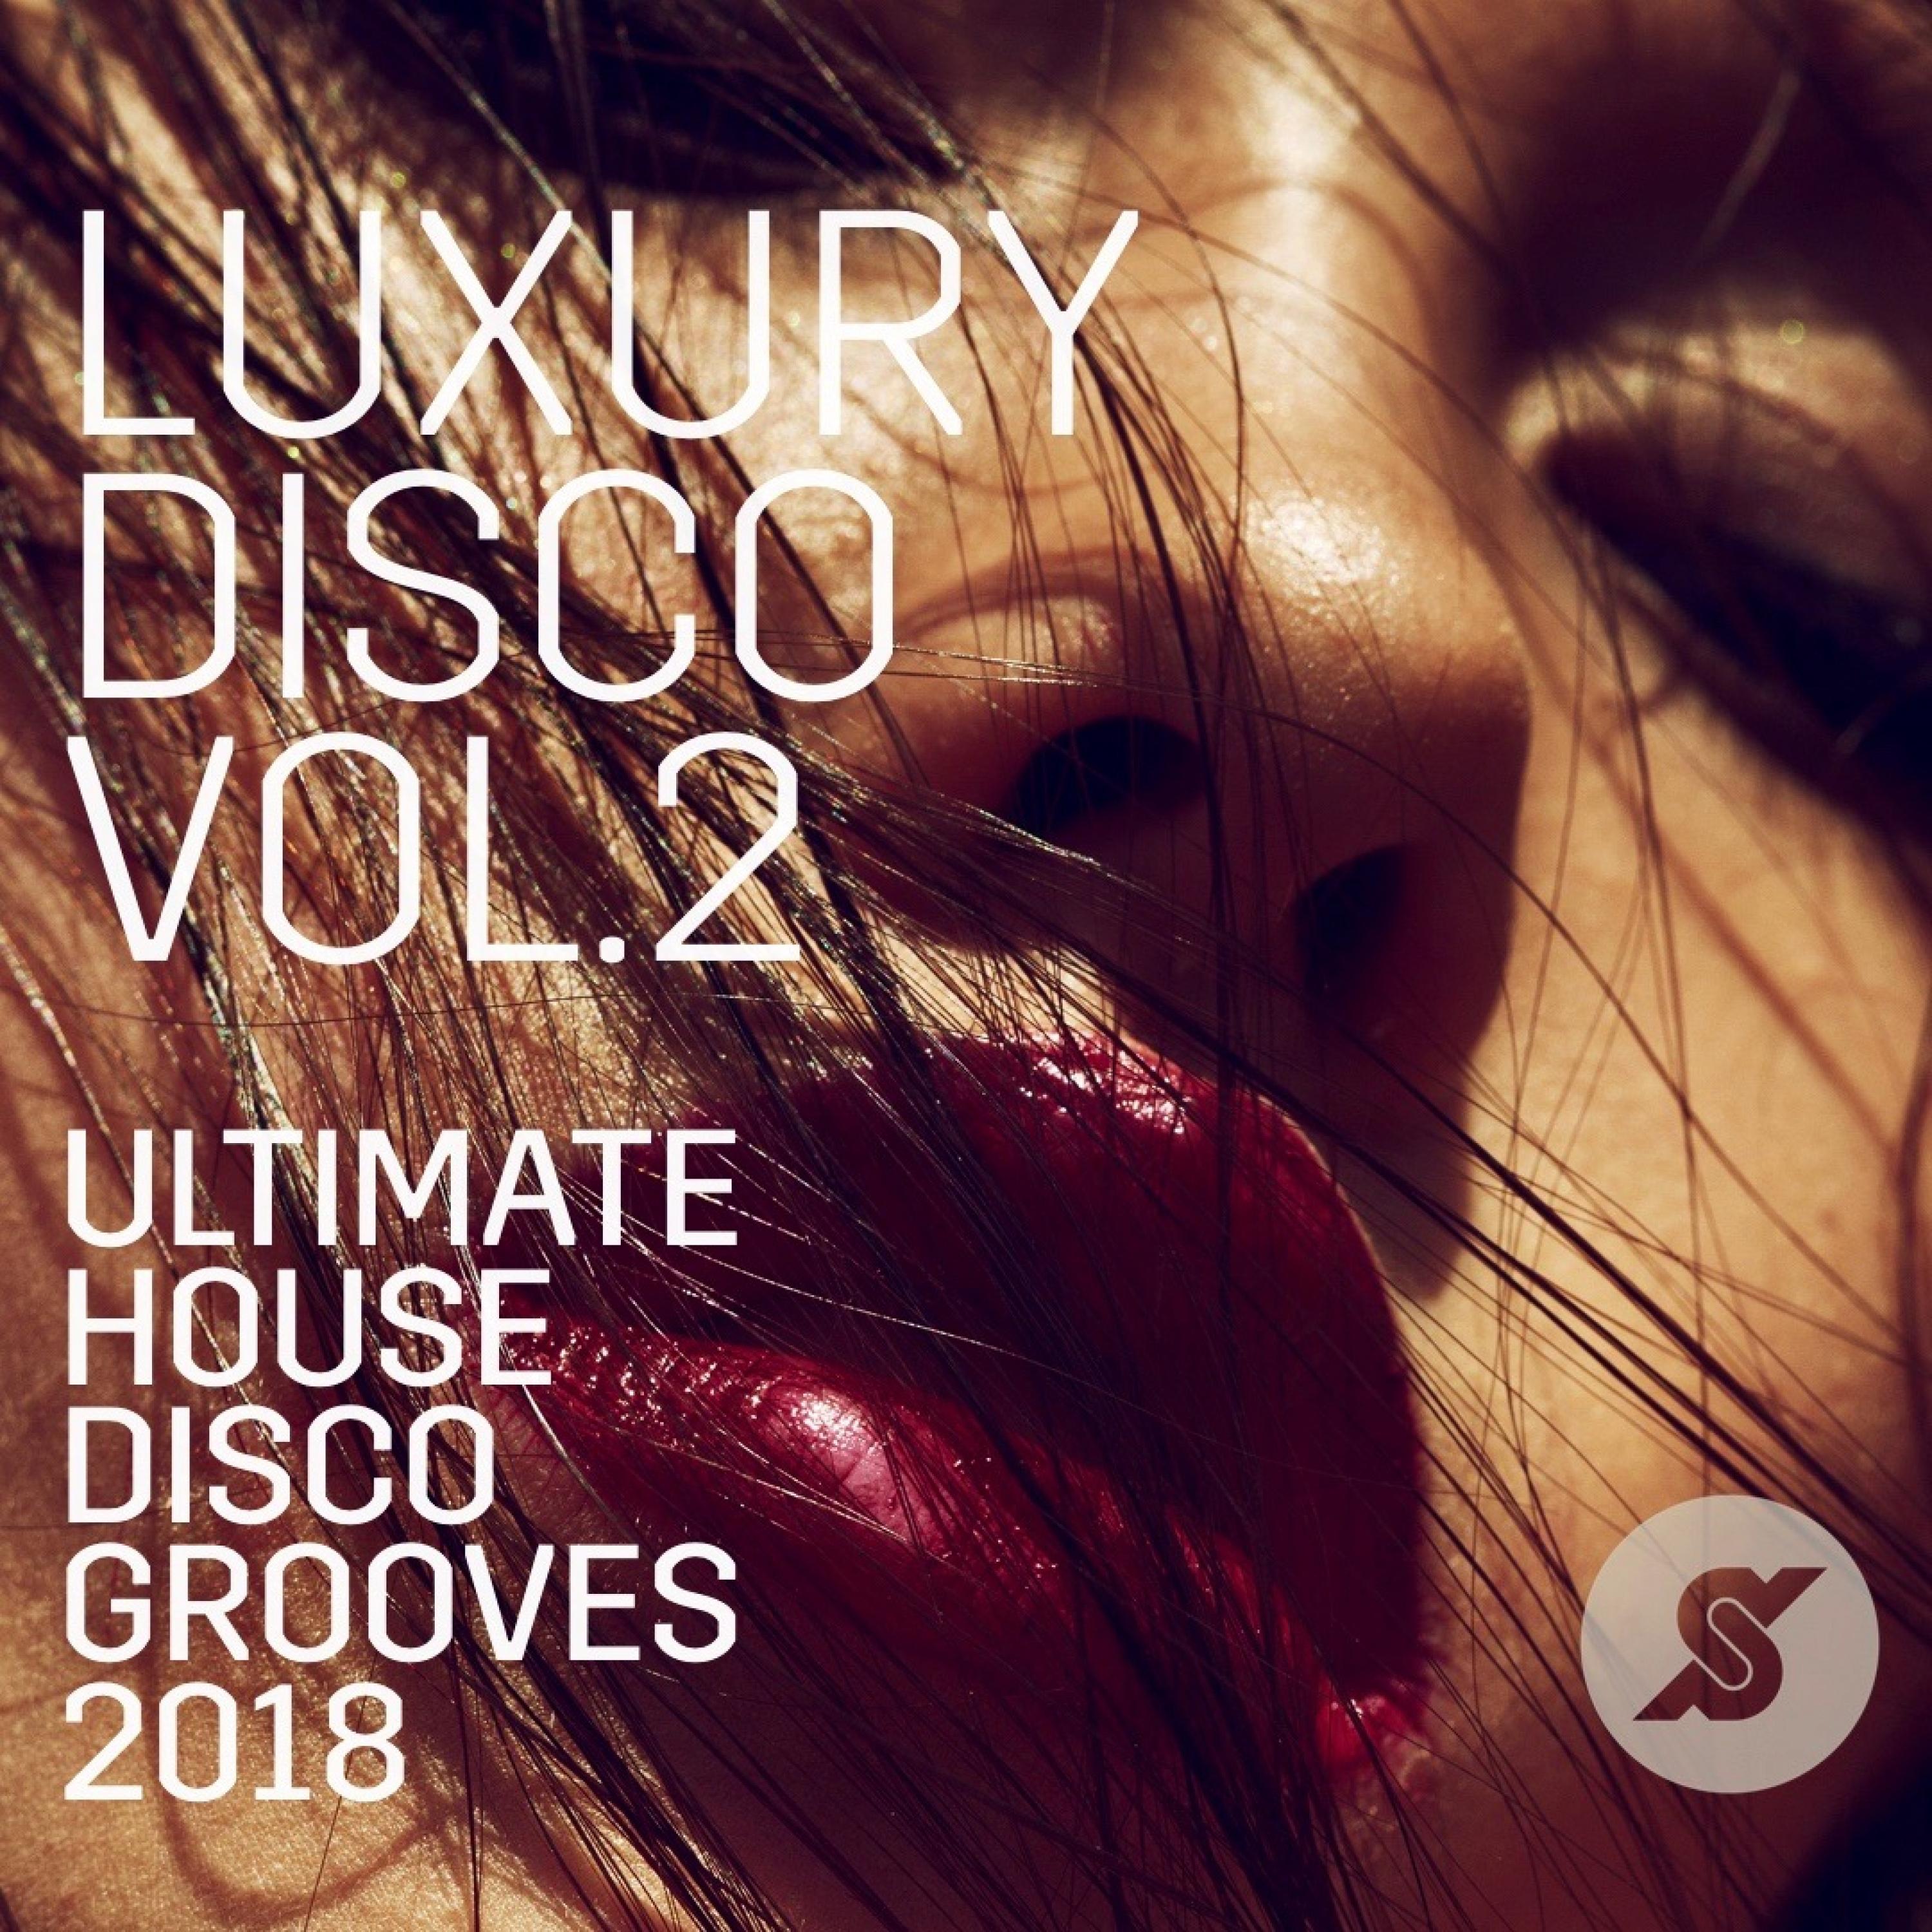 Luxury Disco - Ultimate House Disco Grooves 2018 Vol.2